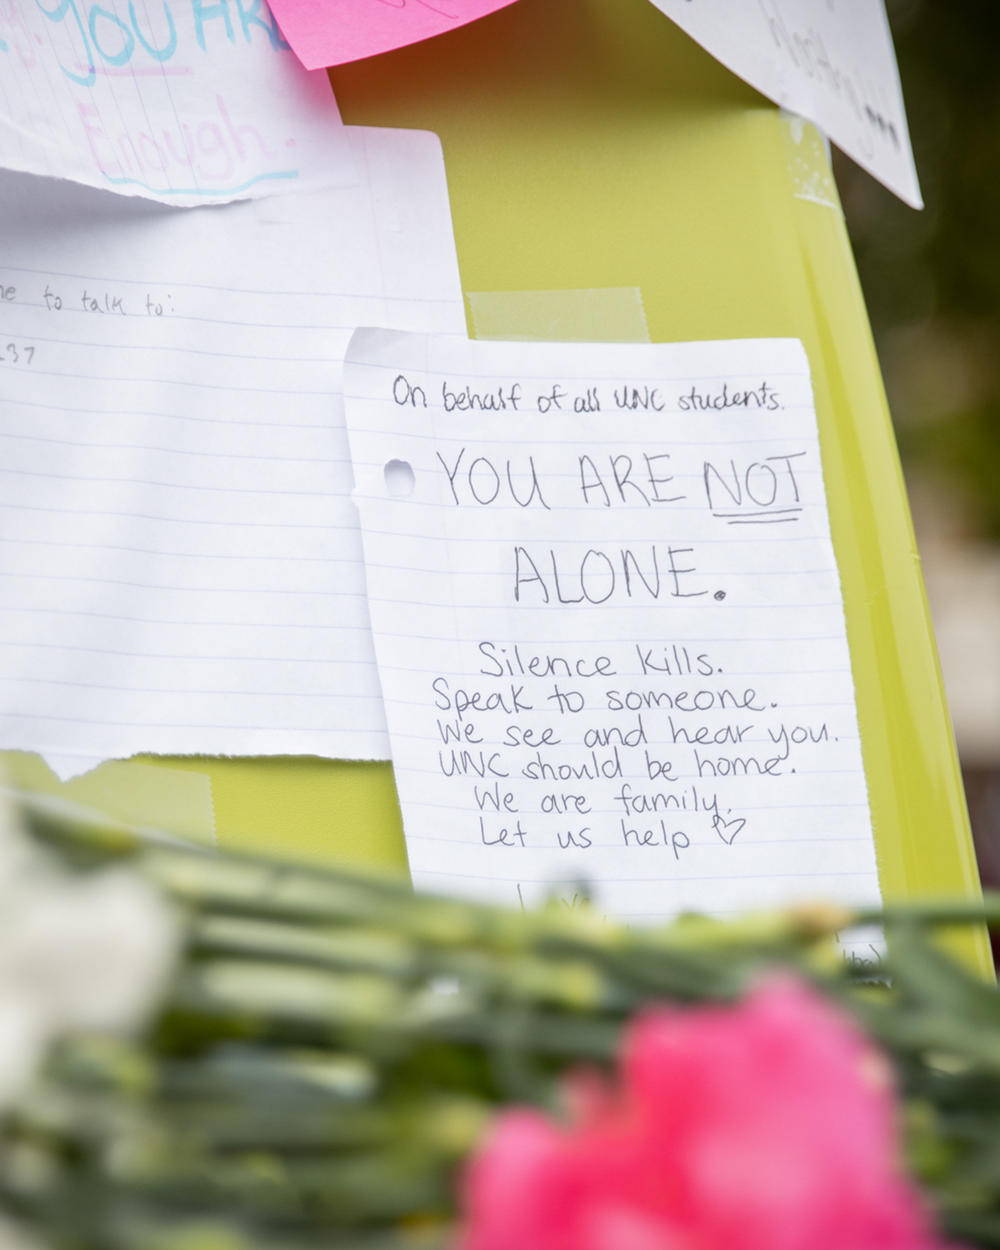 At UNC, in the days after the two suicides in October, members of the campus Active Minds chapter wrote more than 150 notes of affirmation and distributed them to students with lists of mental health resources.